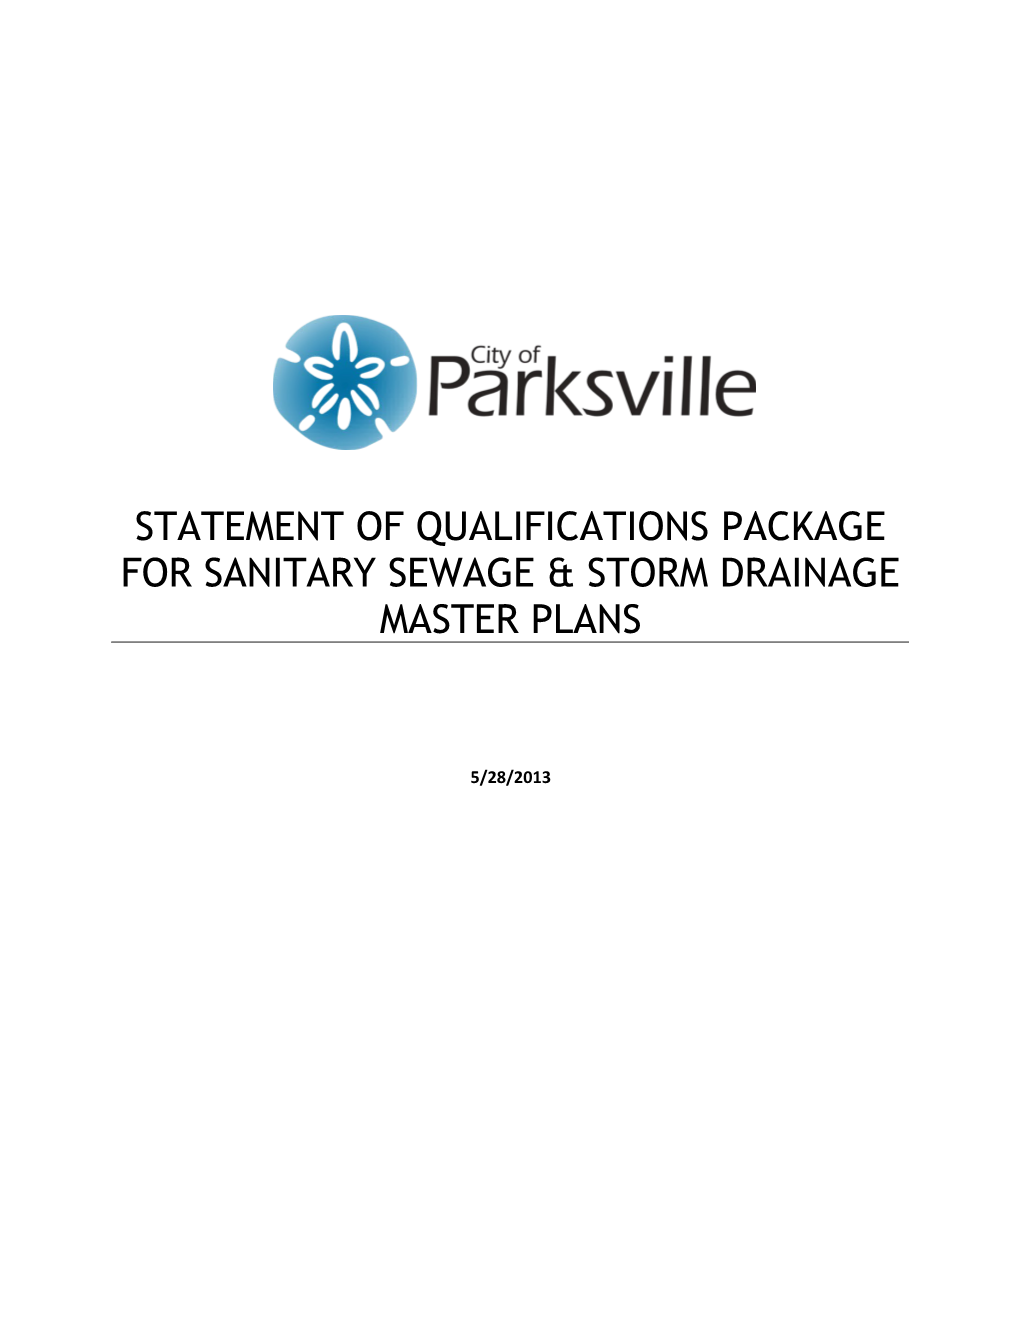 Statement of Qualifications Package for Sanitary Sewage & Storm Drainage Master Plans